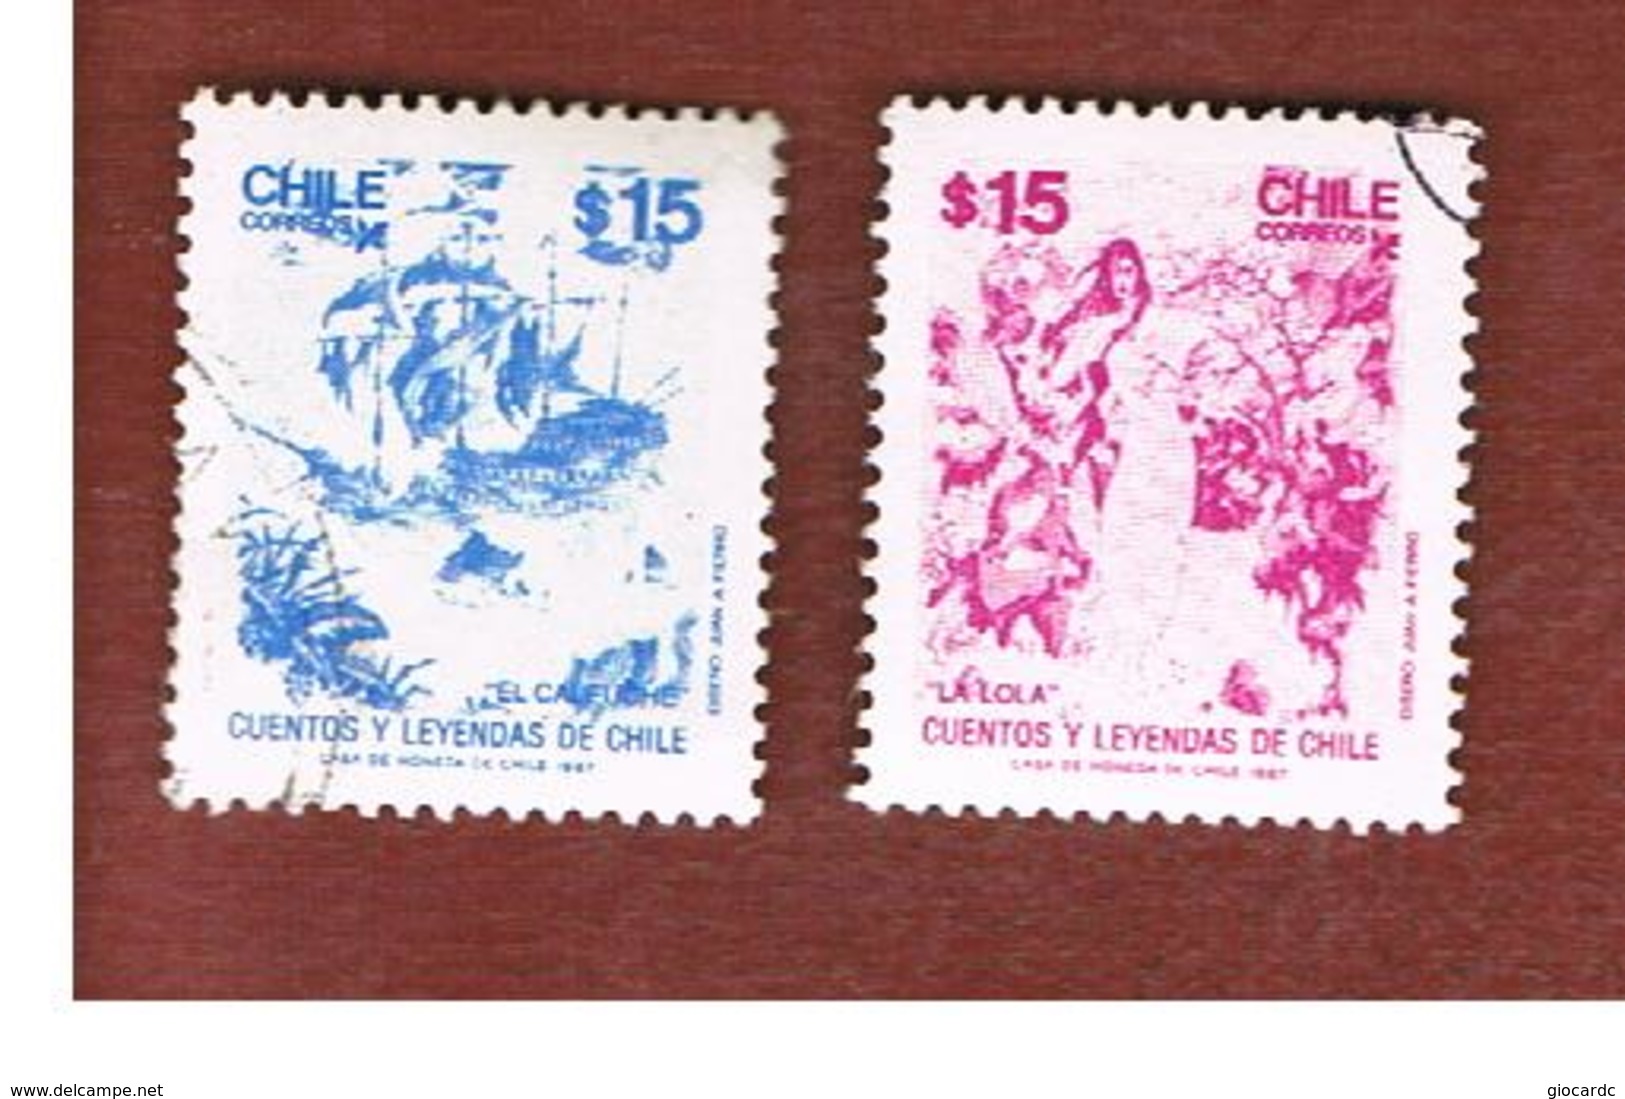 CILE (CHILE)  - SG 1093.1095 -    1987  FOLK TALES (2 STAMPS OF THE SET)   -     USED ° - Cile